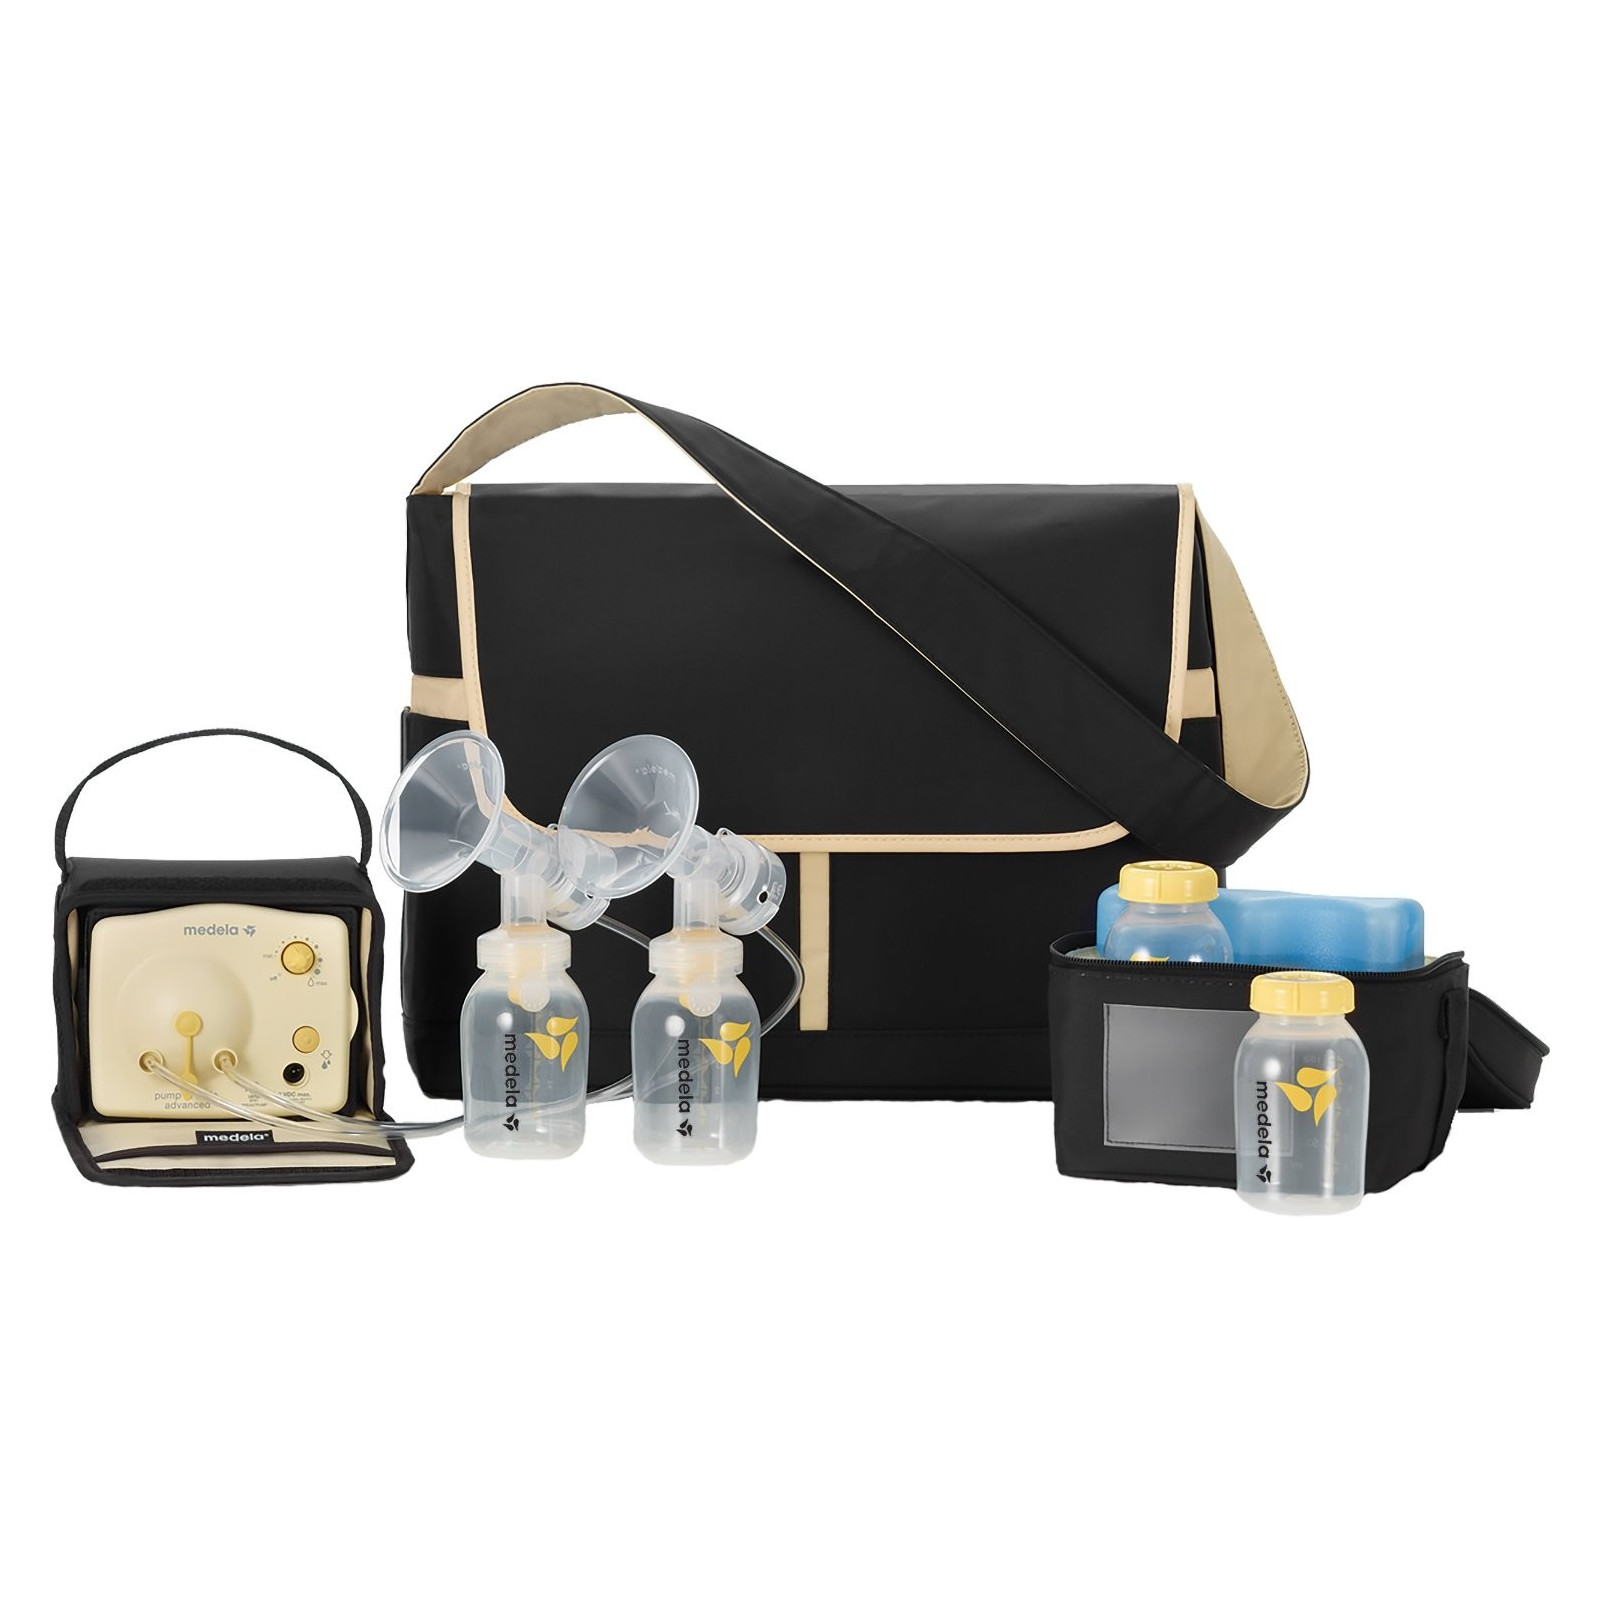 Medela Pump in Style Advanced Breast Pump - The Metro Bag (UPGRADE ONLY) -  Amedsupplies.com